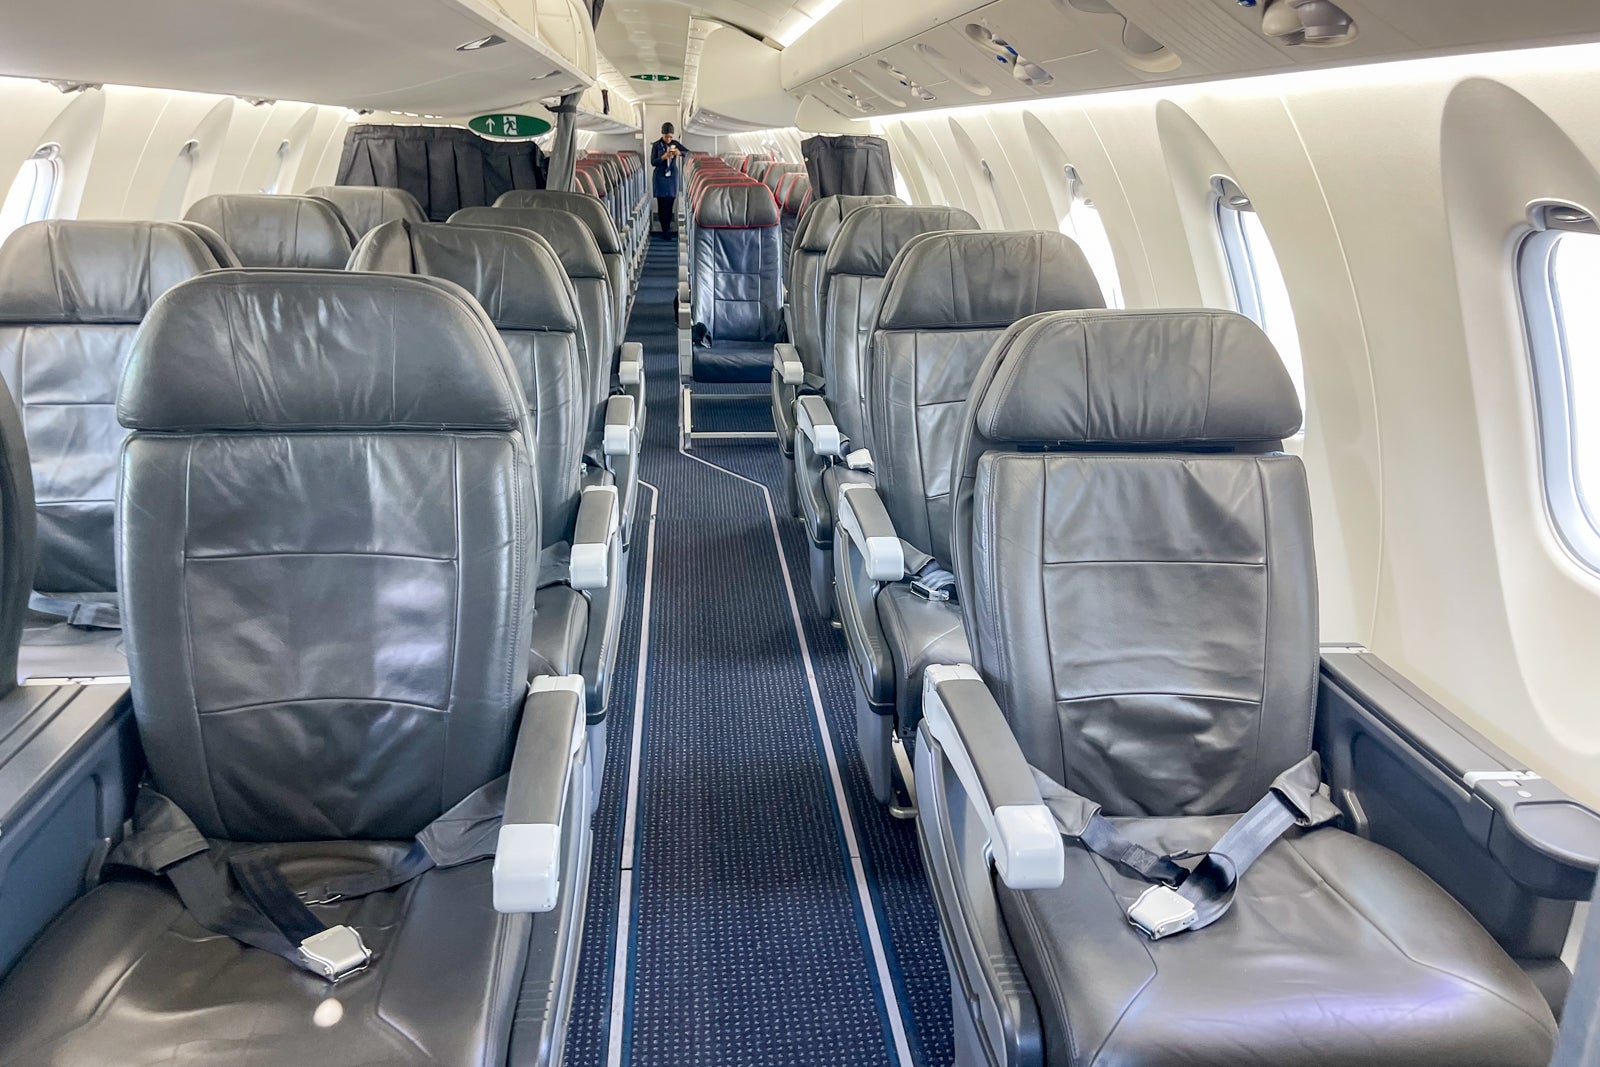 Quick Points: How first class can save you money